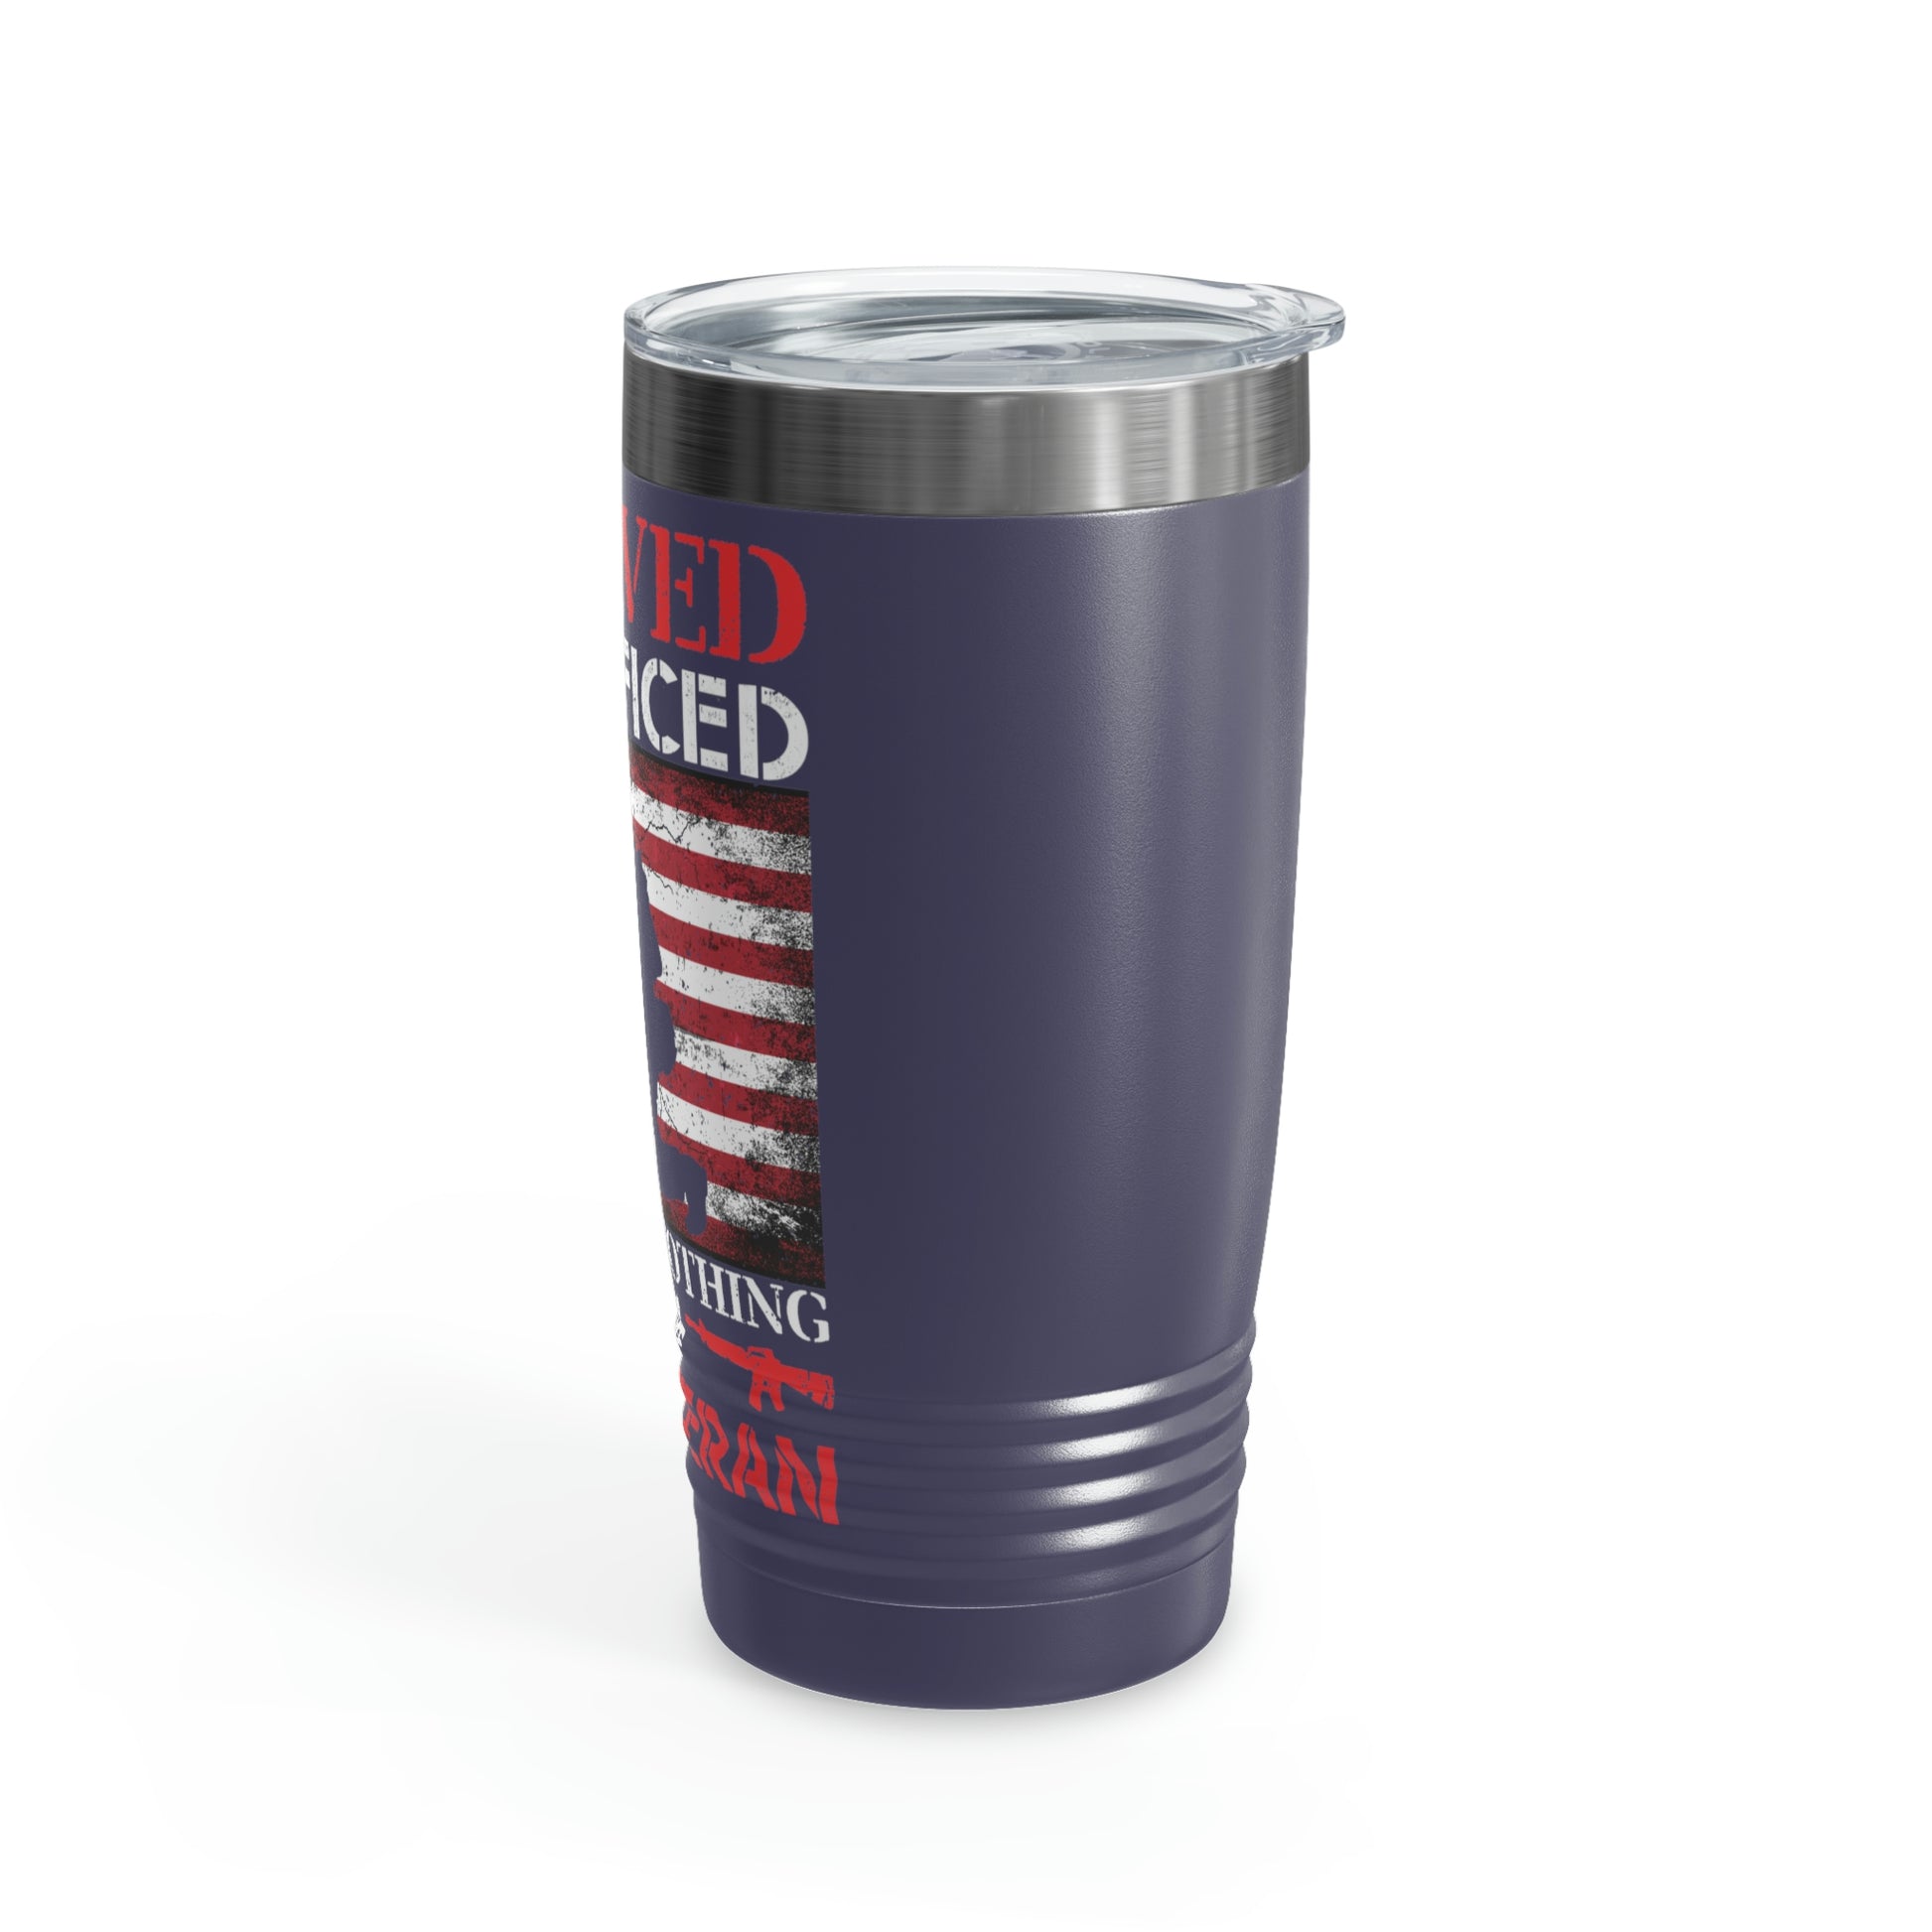 "I Served, I Sacrificed American Veteran" Tumbler, 20oz - Weave Got Gifts - Unique Gifts You Won’t Find Anywhere Else!